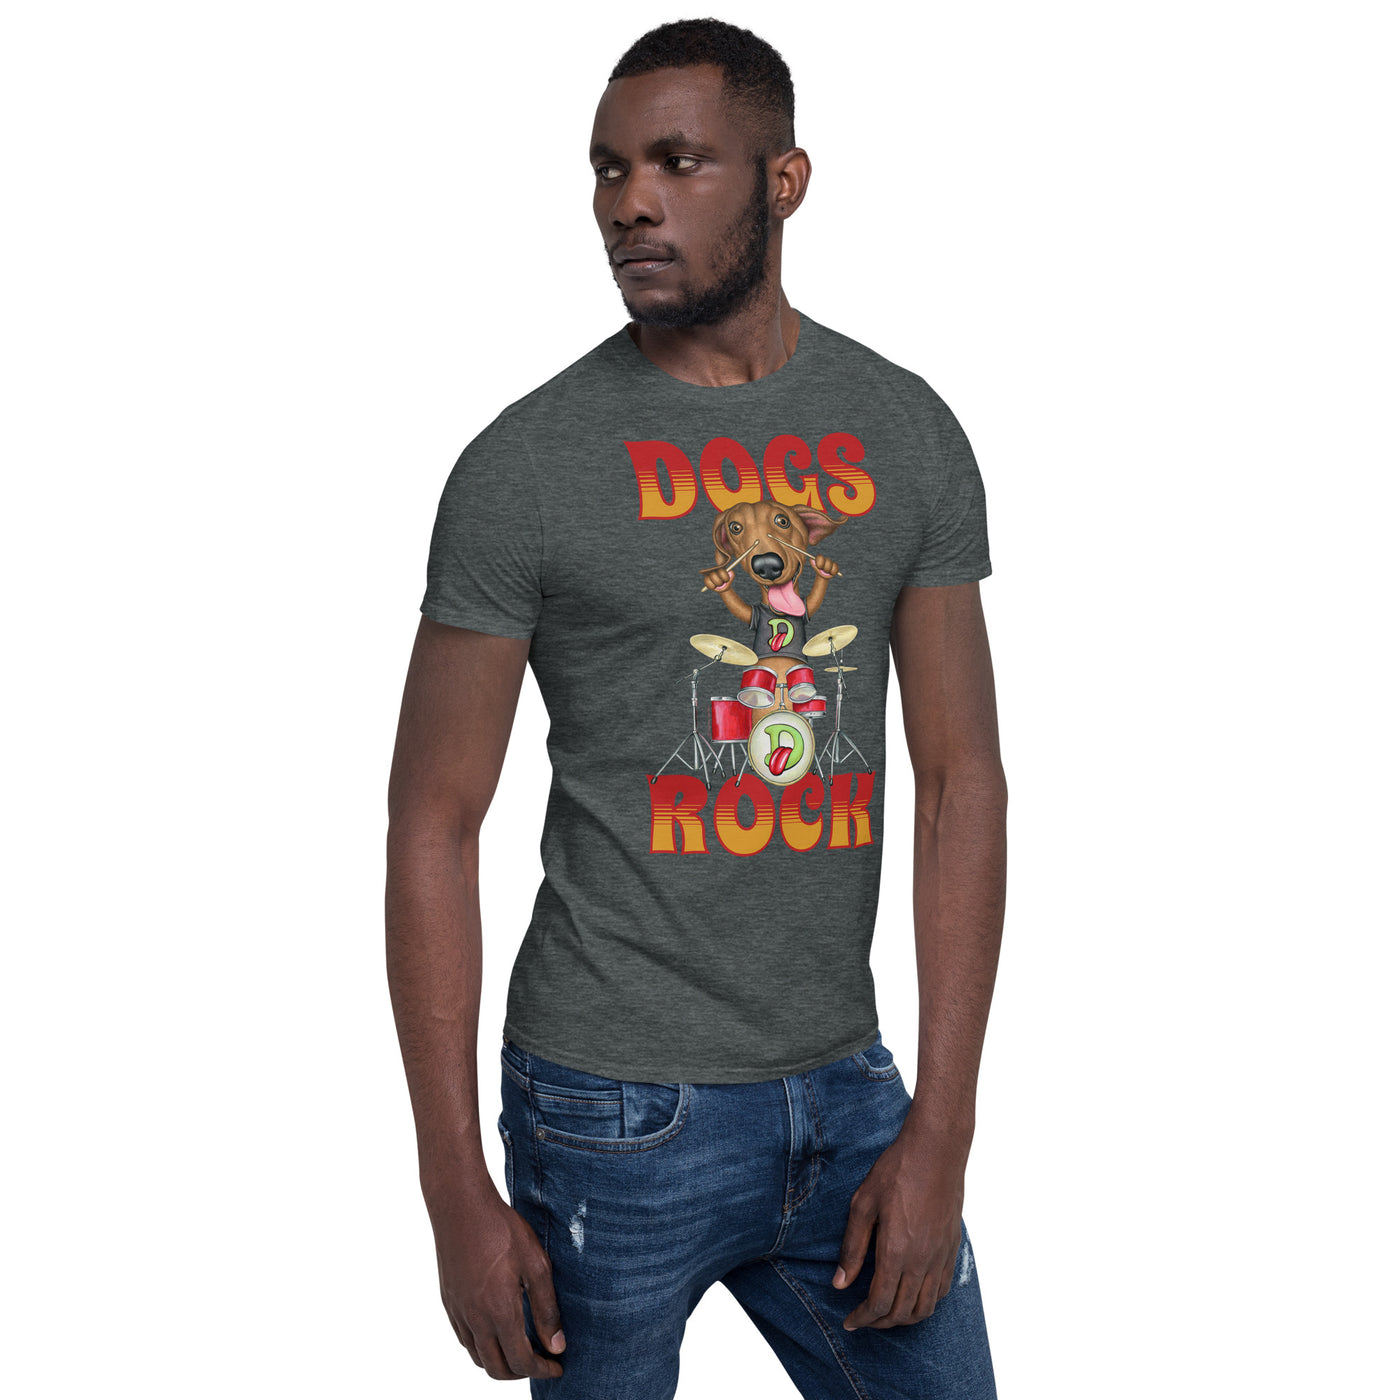 Cute Doxie playing for the best rock band music on a Dogs Rock Unisex T-Shirt